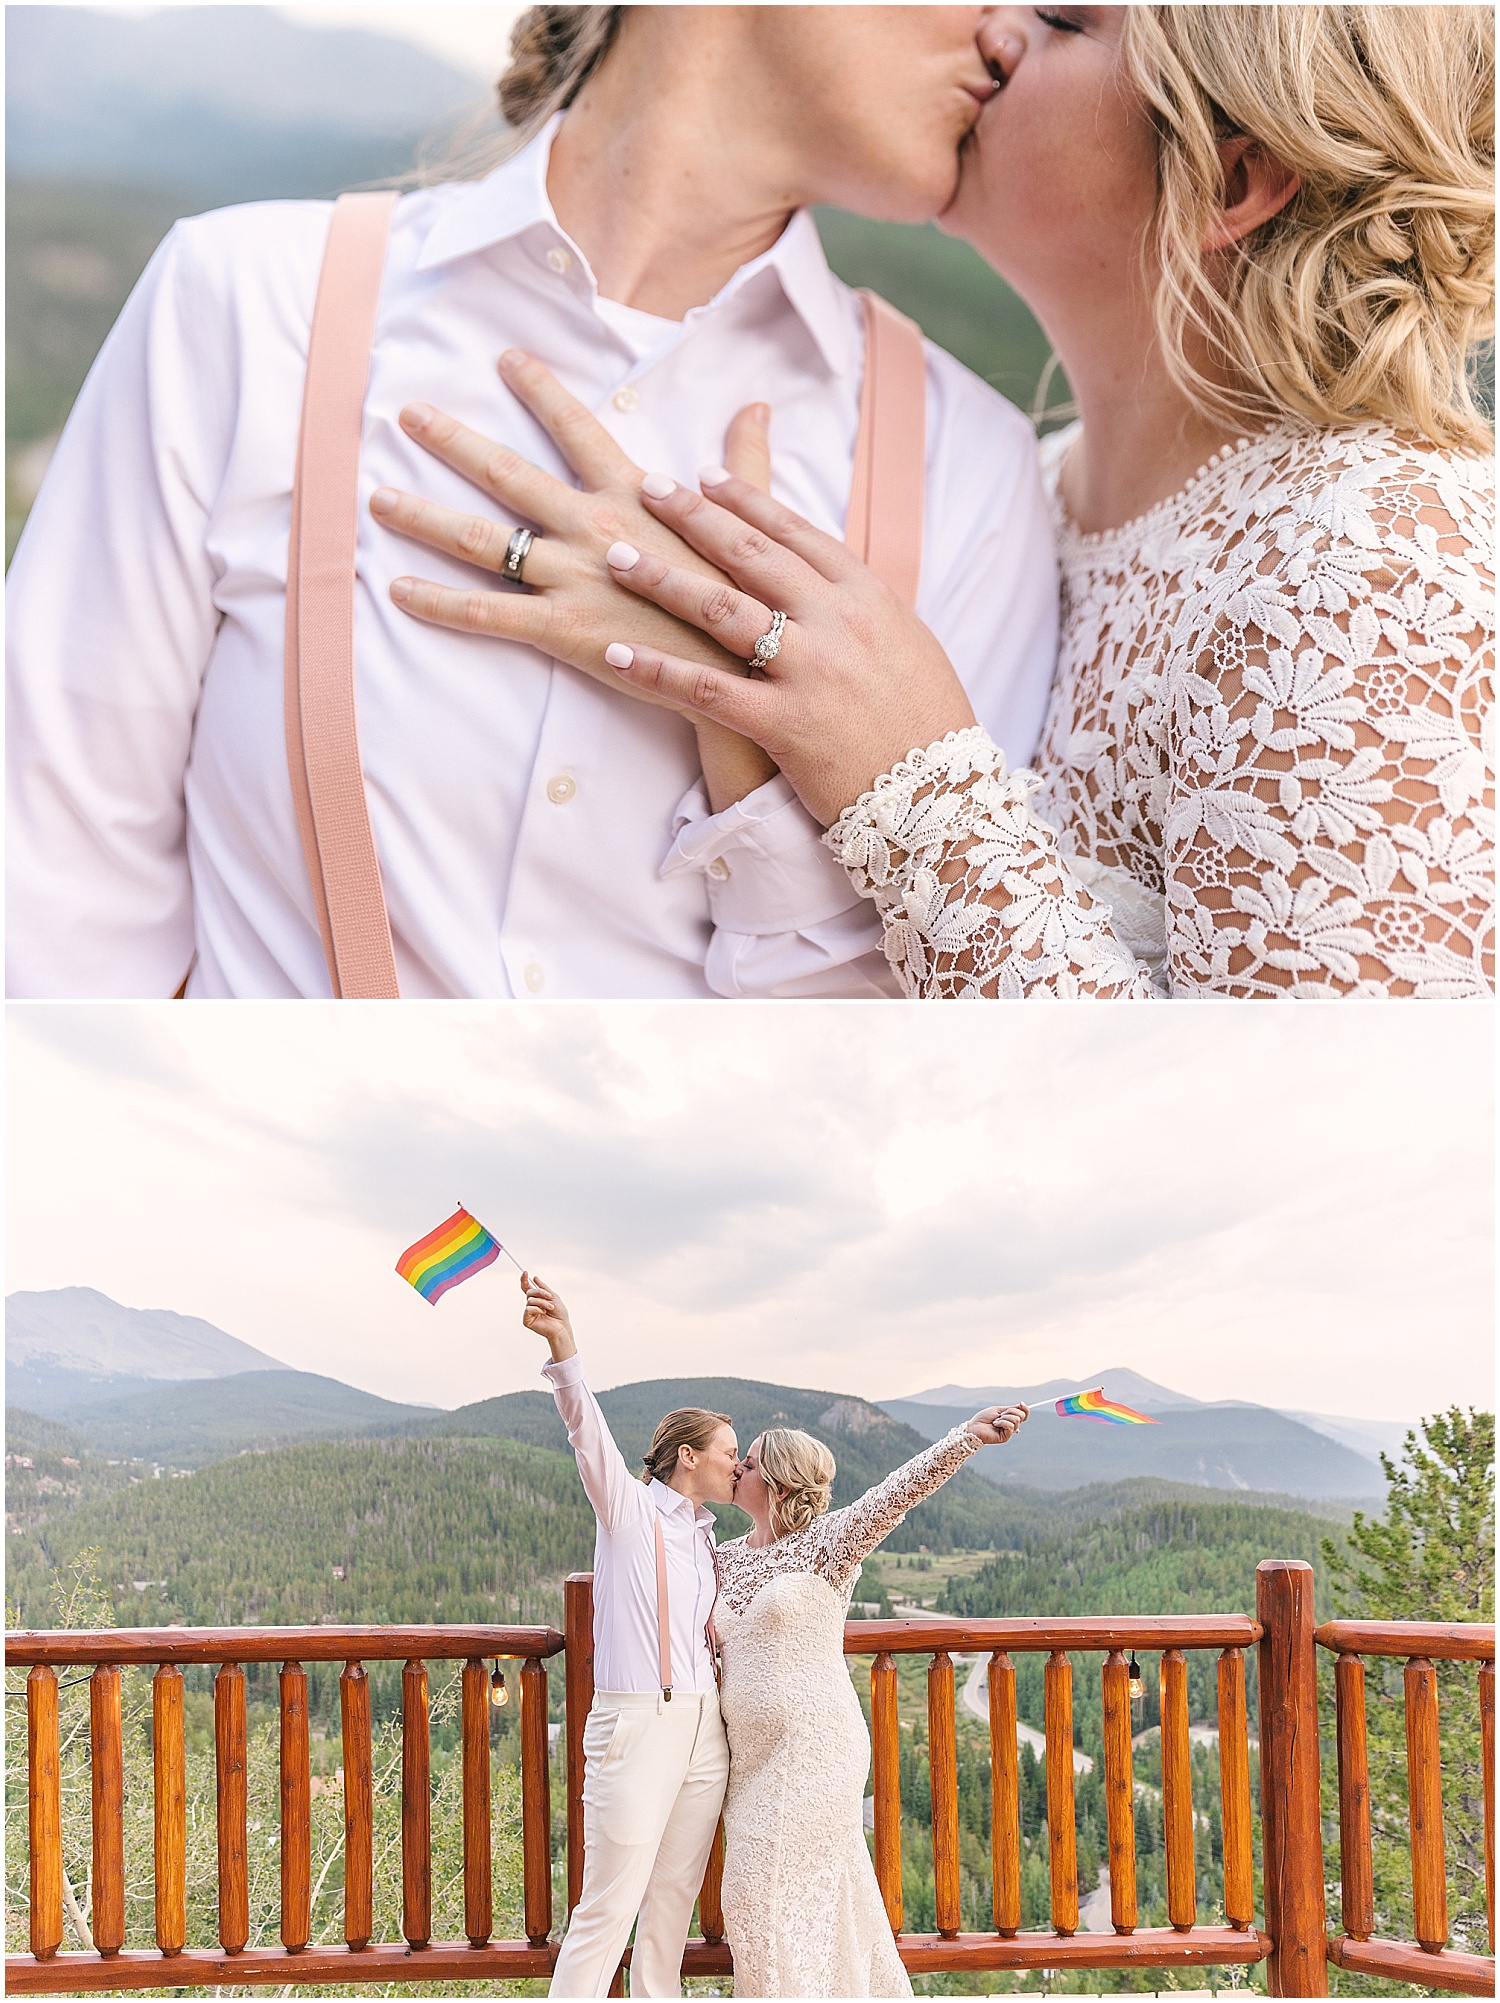 Lesbian wedding photo ideas with the rings and rainbow flags